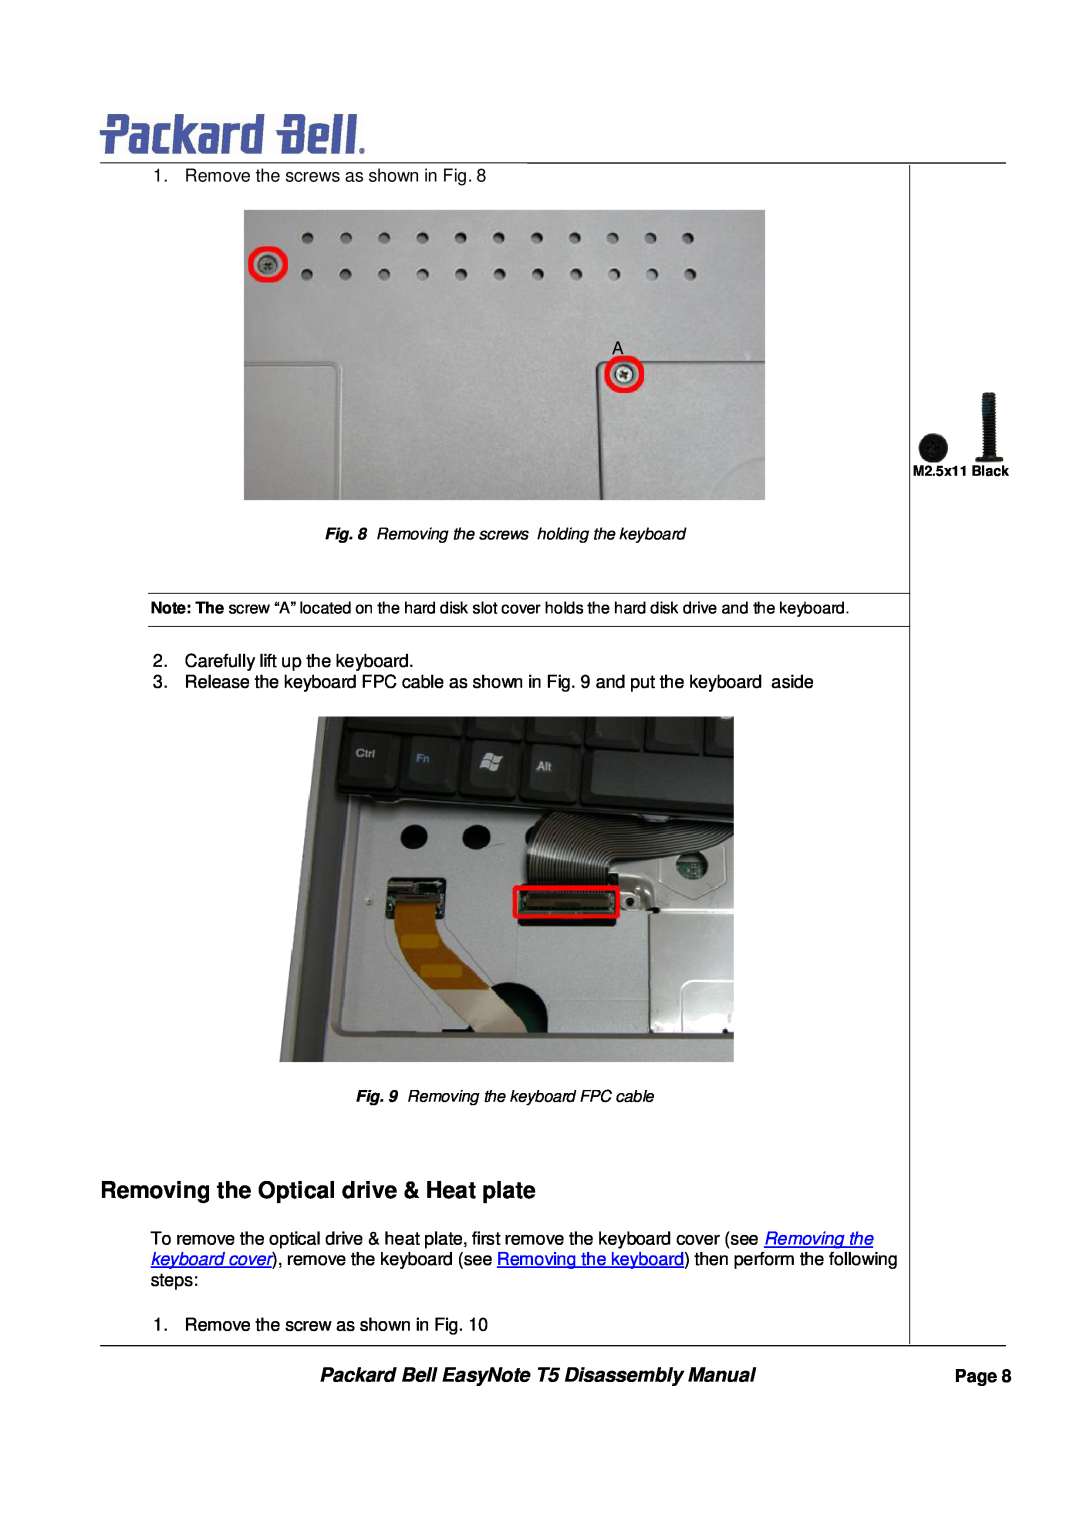 Packard Bell manual Removing the Optical drive & Heat plate, Packard Bell EasyNote T5 Disassembly Manual 